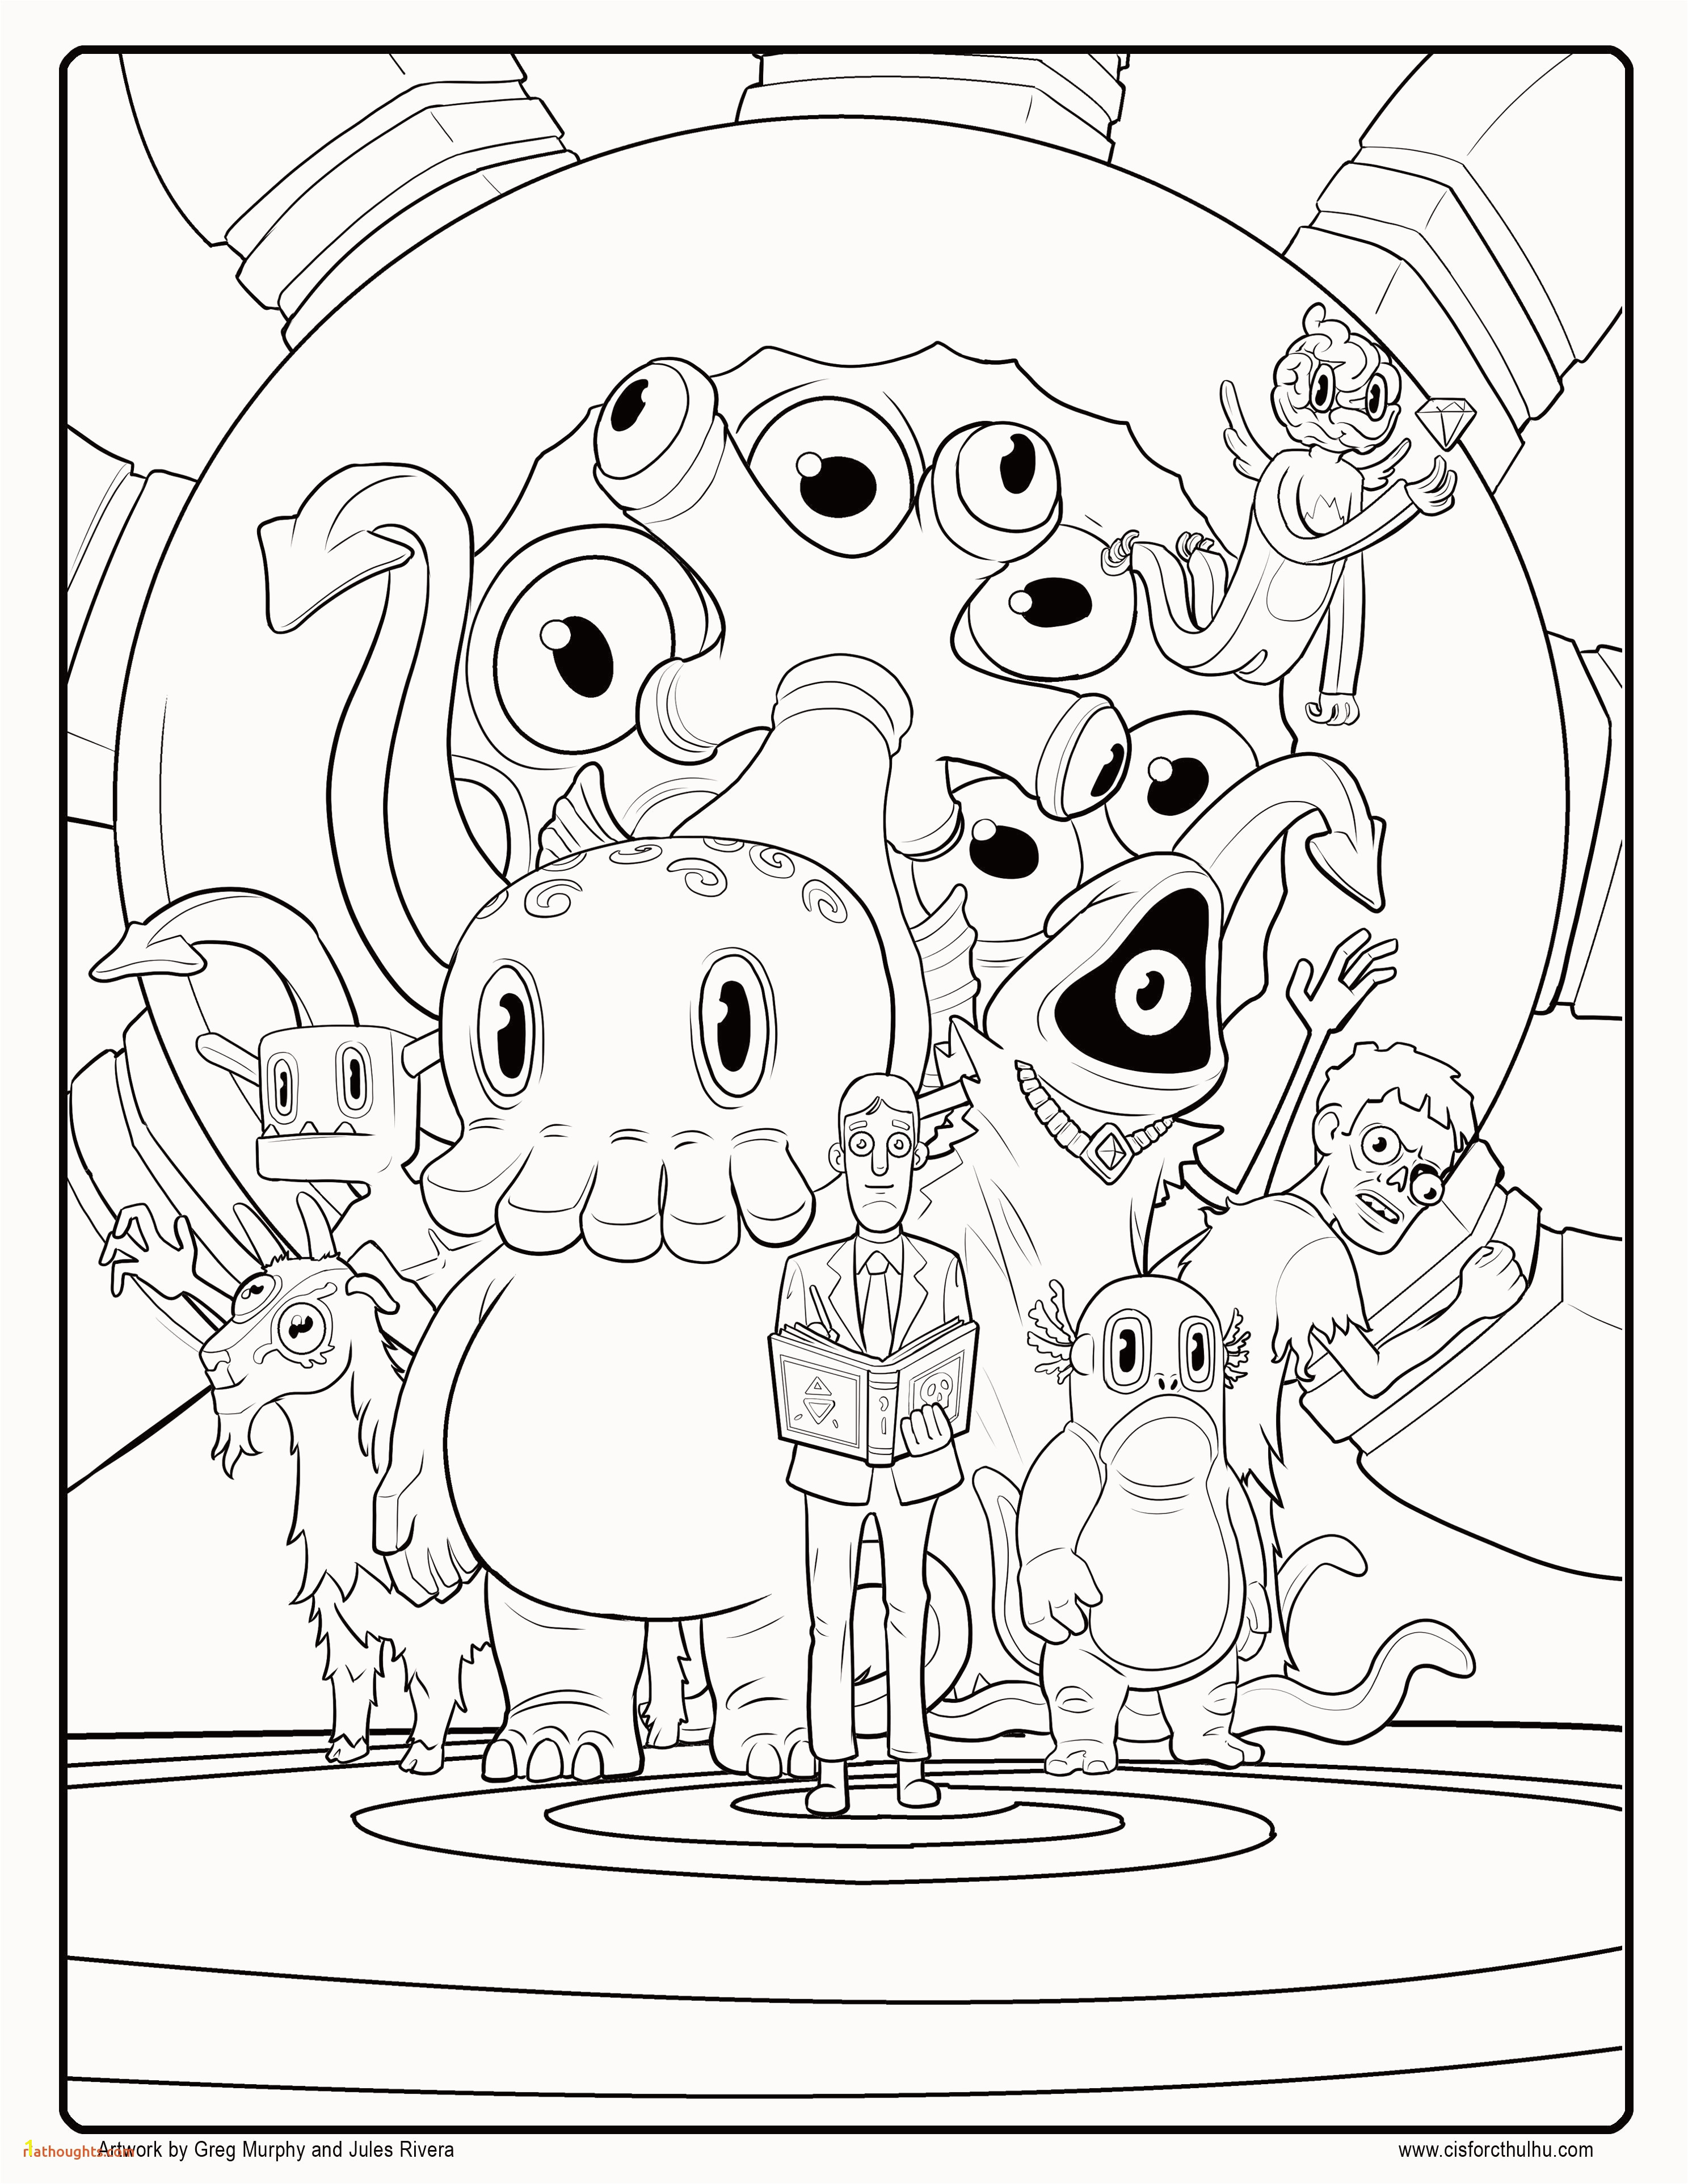 Tigger Easter Coloring Pages Coloring Pages Free Printable Coloring Pages for Children that You